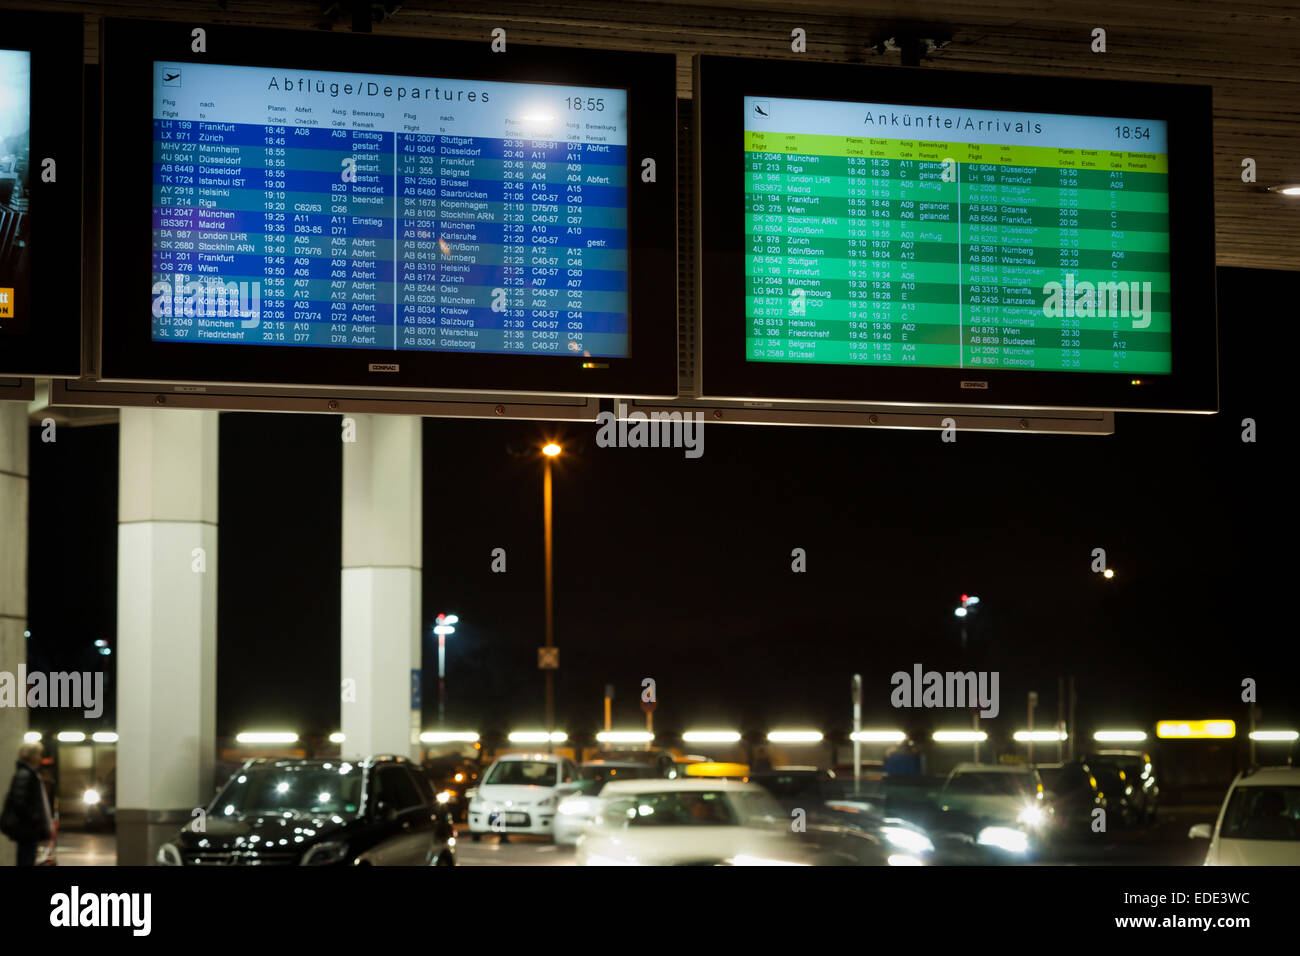 nightshot of flight schedules with departures and arrivals at the airport. Photo: December 16, 2014. Stock Photo